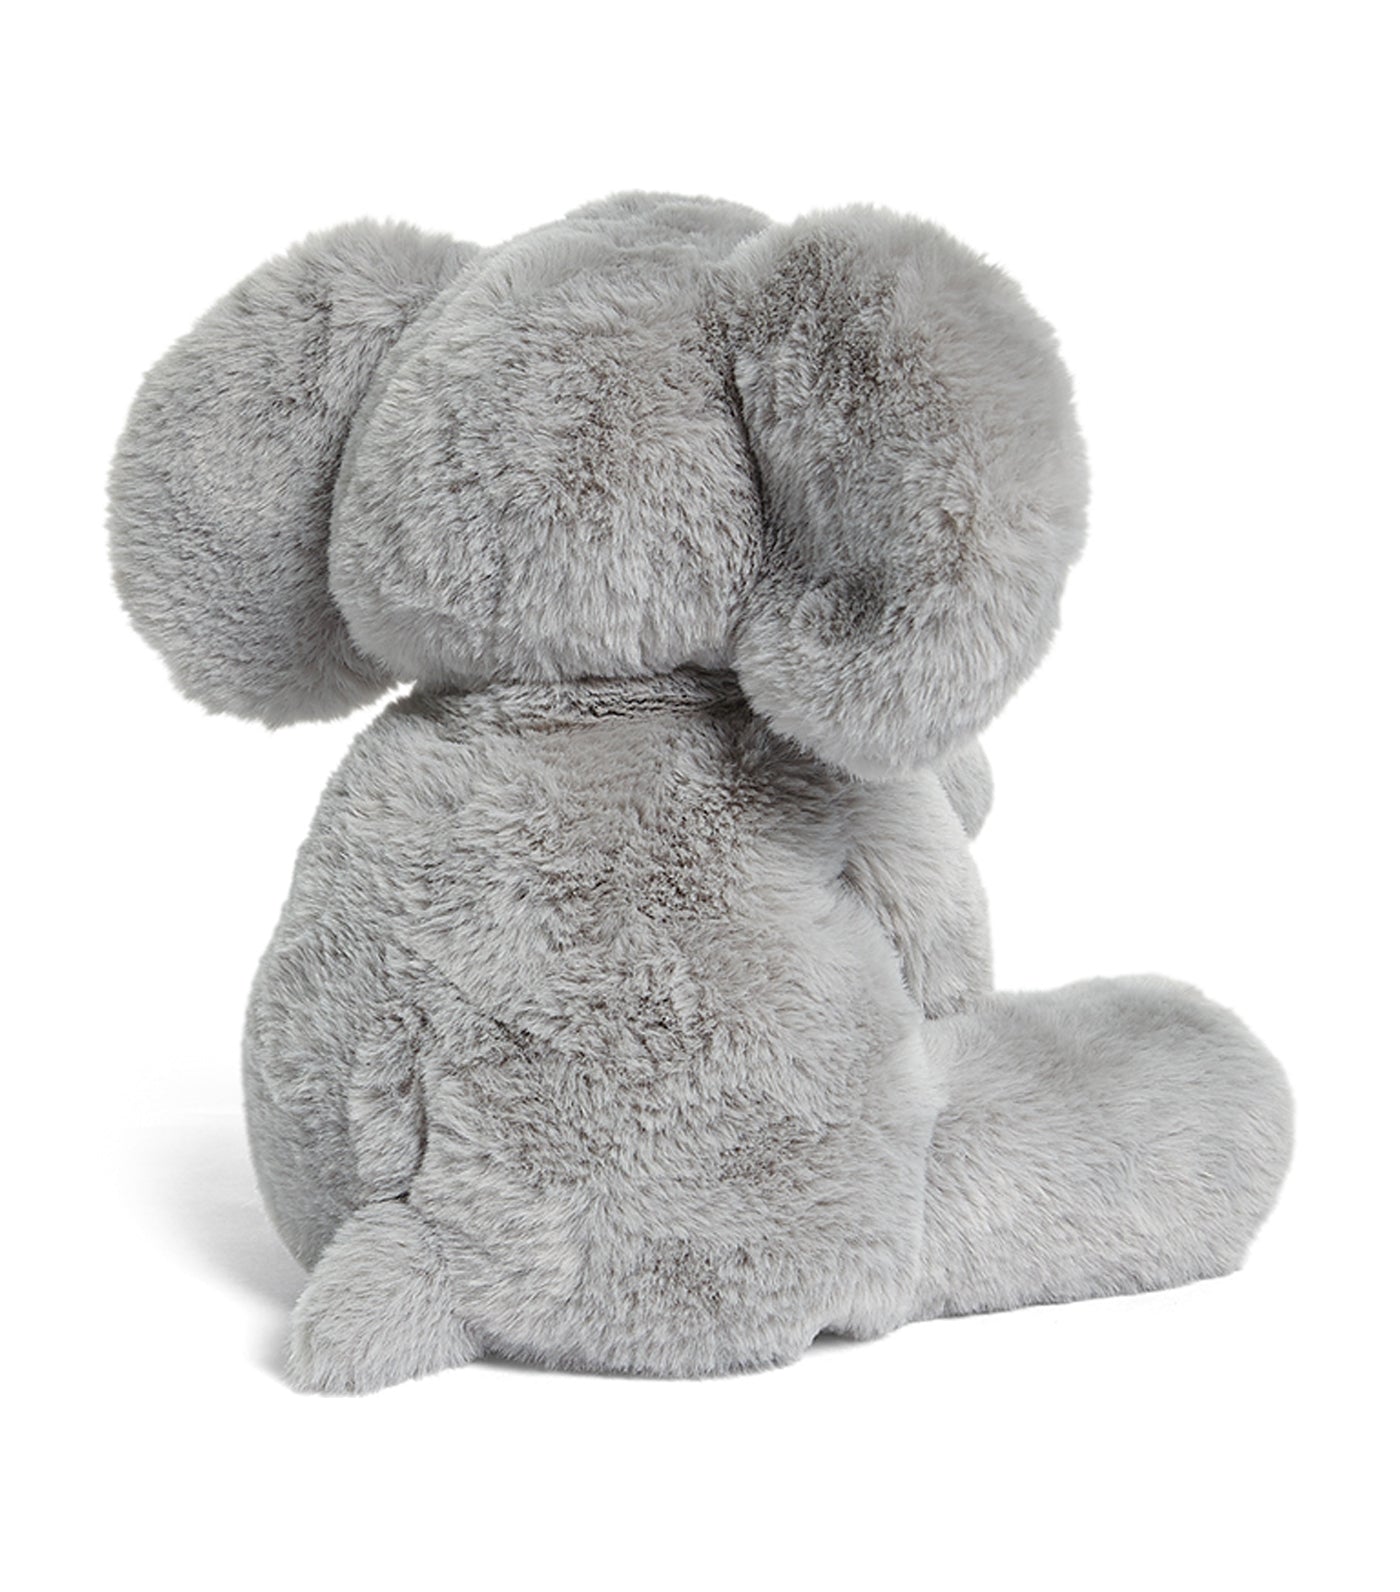 mamas & papas soft toy - welcome to the world elephant